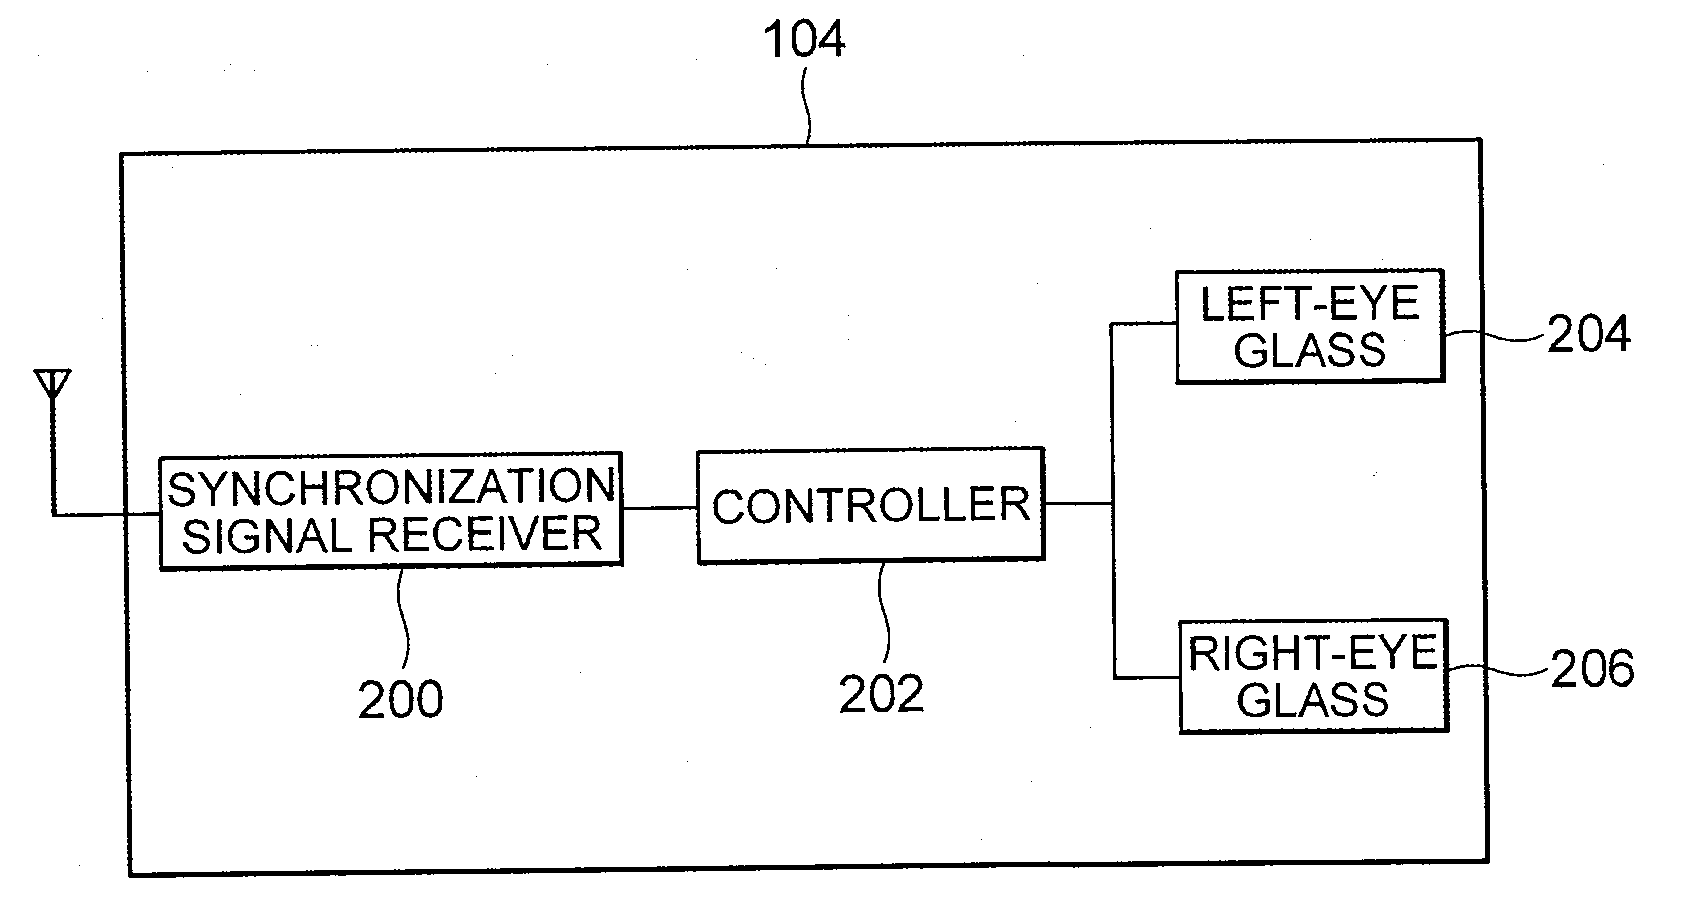 Apparatus and system for viewing 3D image